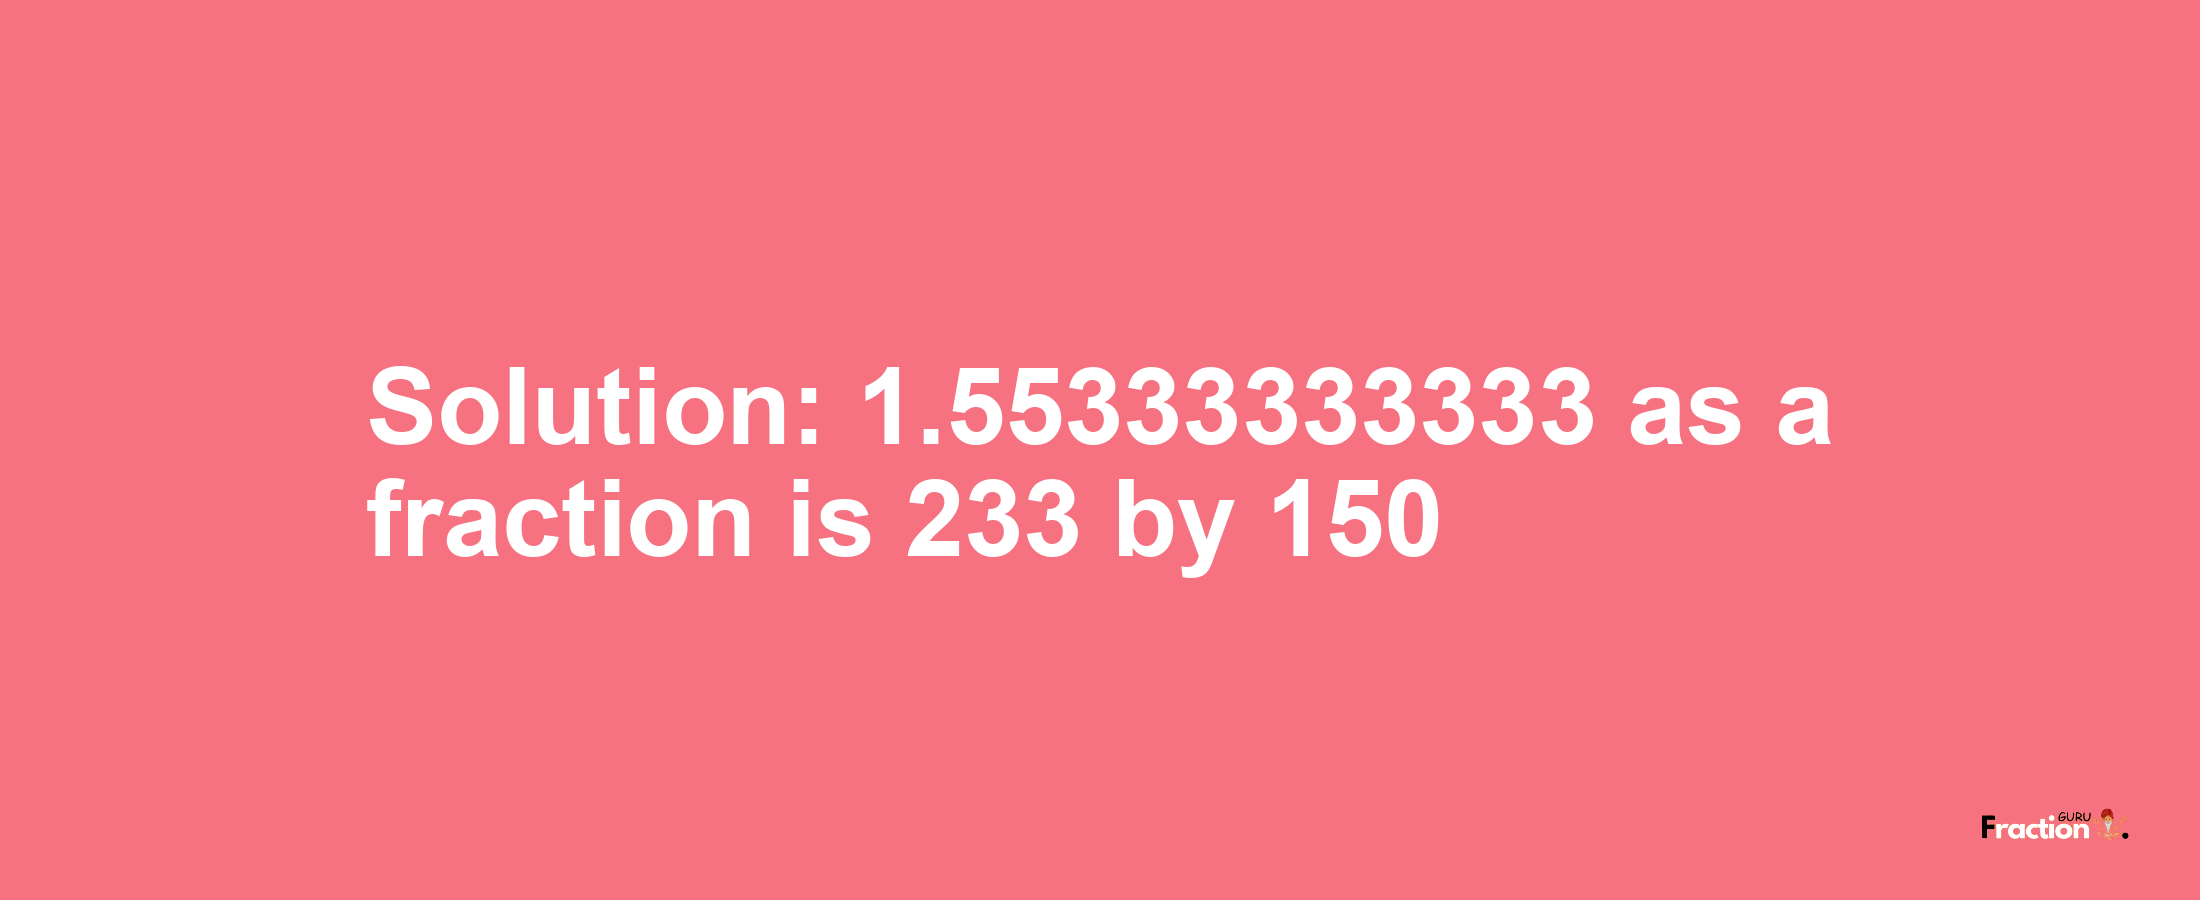 Solution:1.55333333333 as a fraction is 233/150